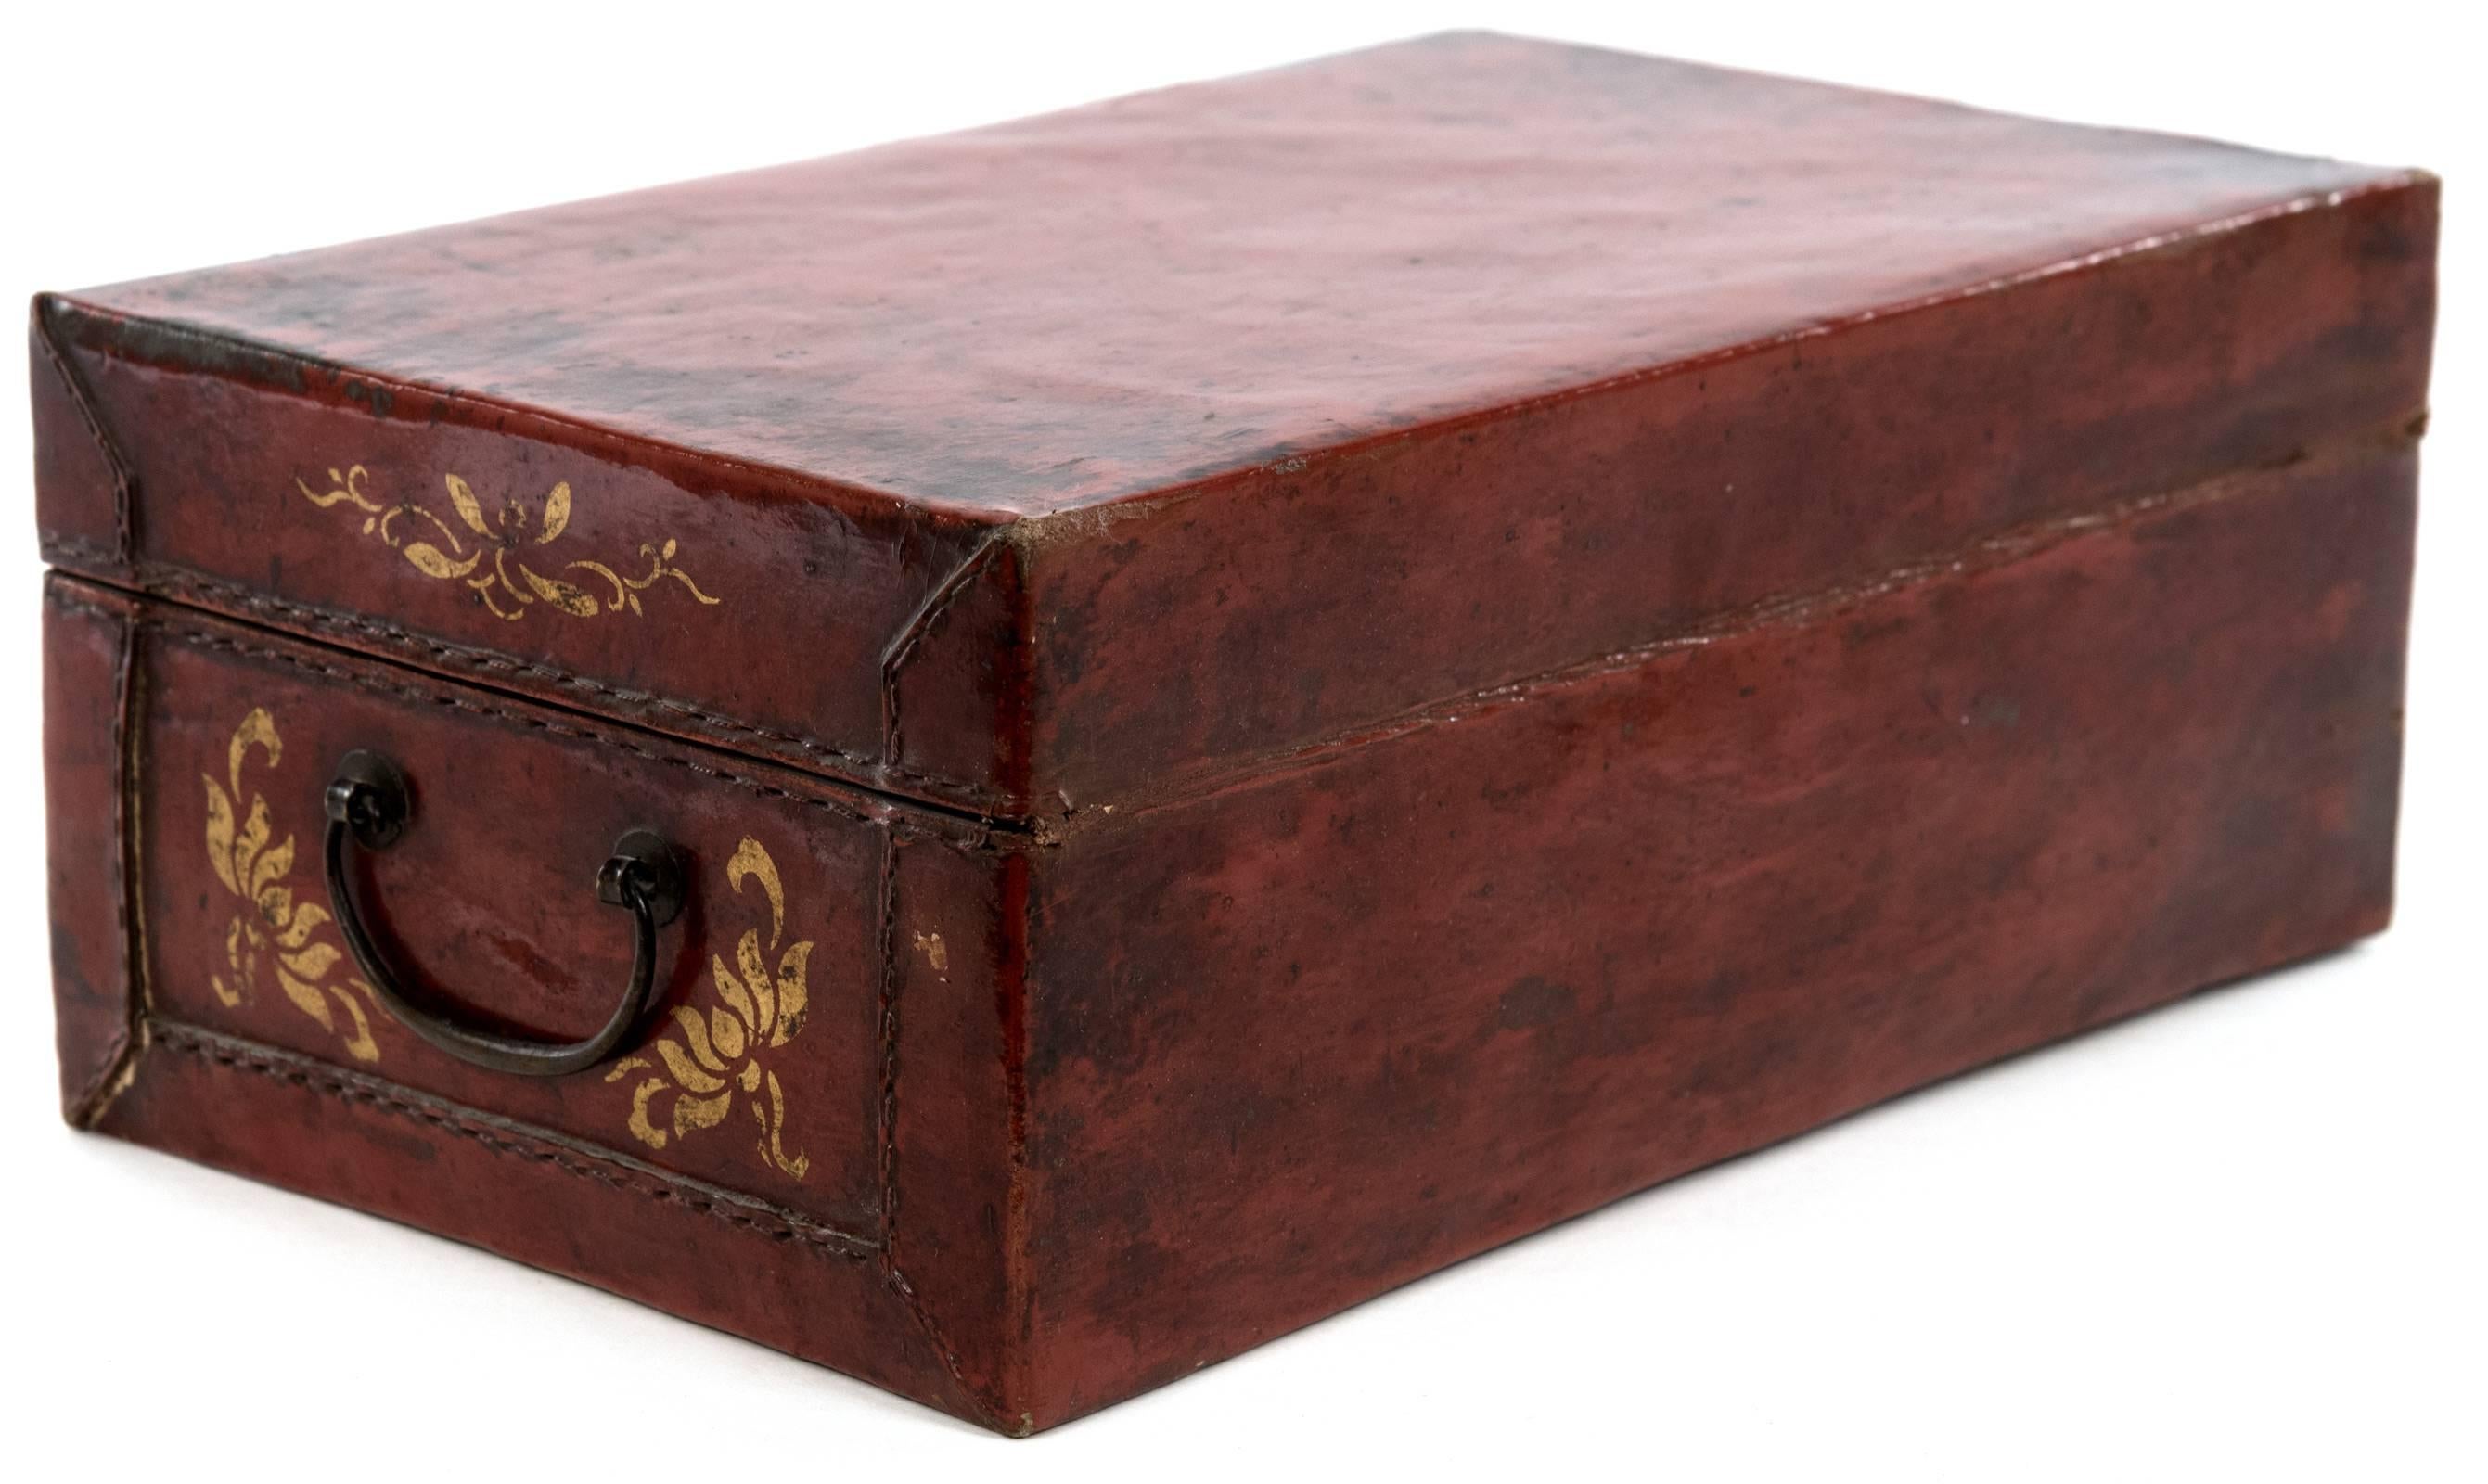 Chinoiserie Chinese Red Leather Box with Gold-Stencil Foliate Ornamentation